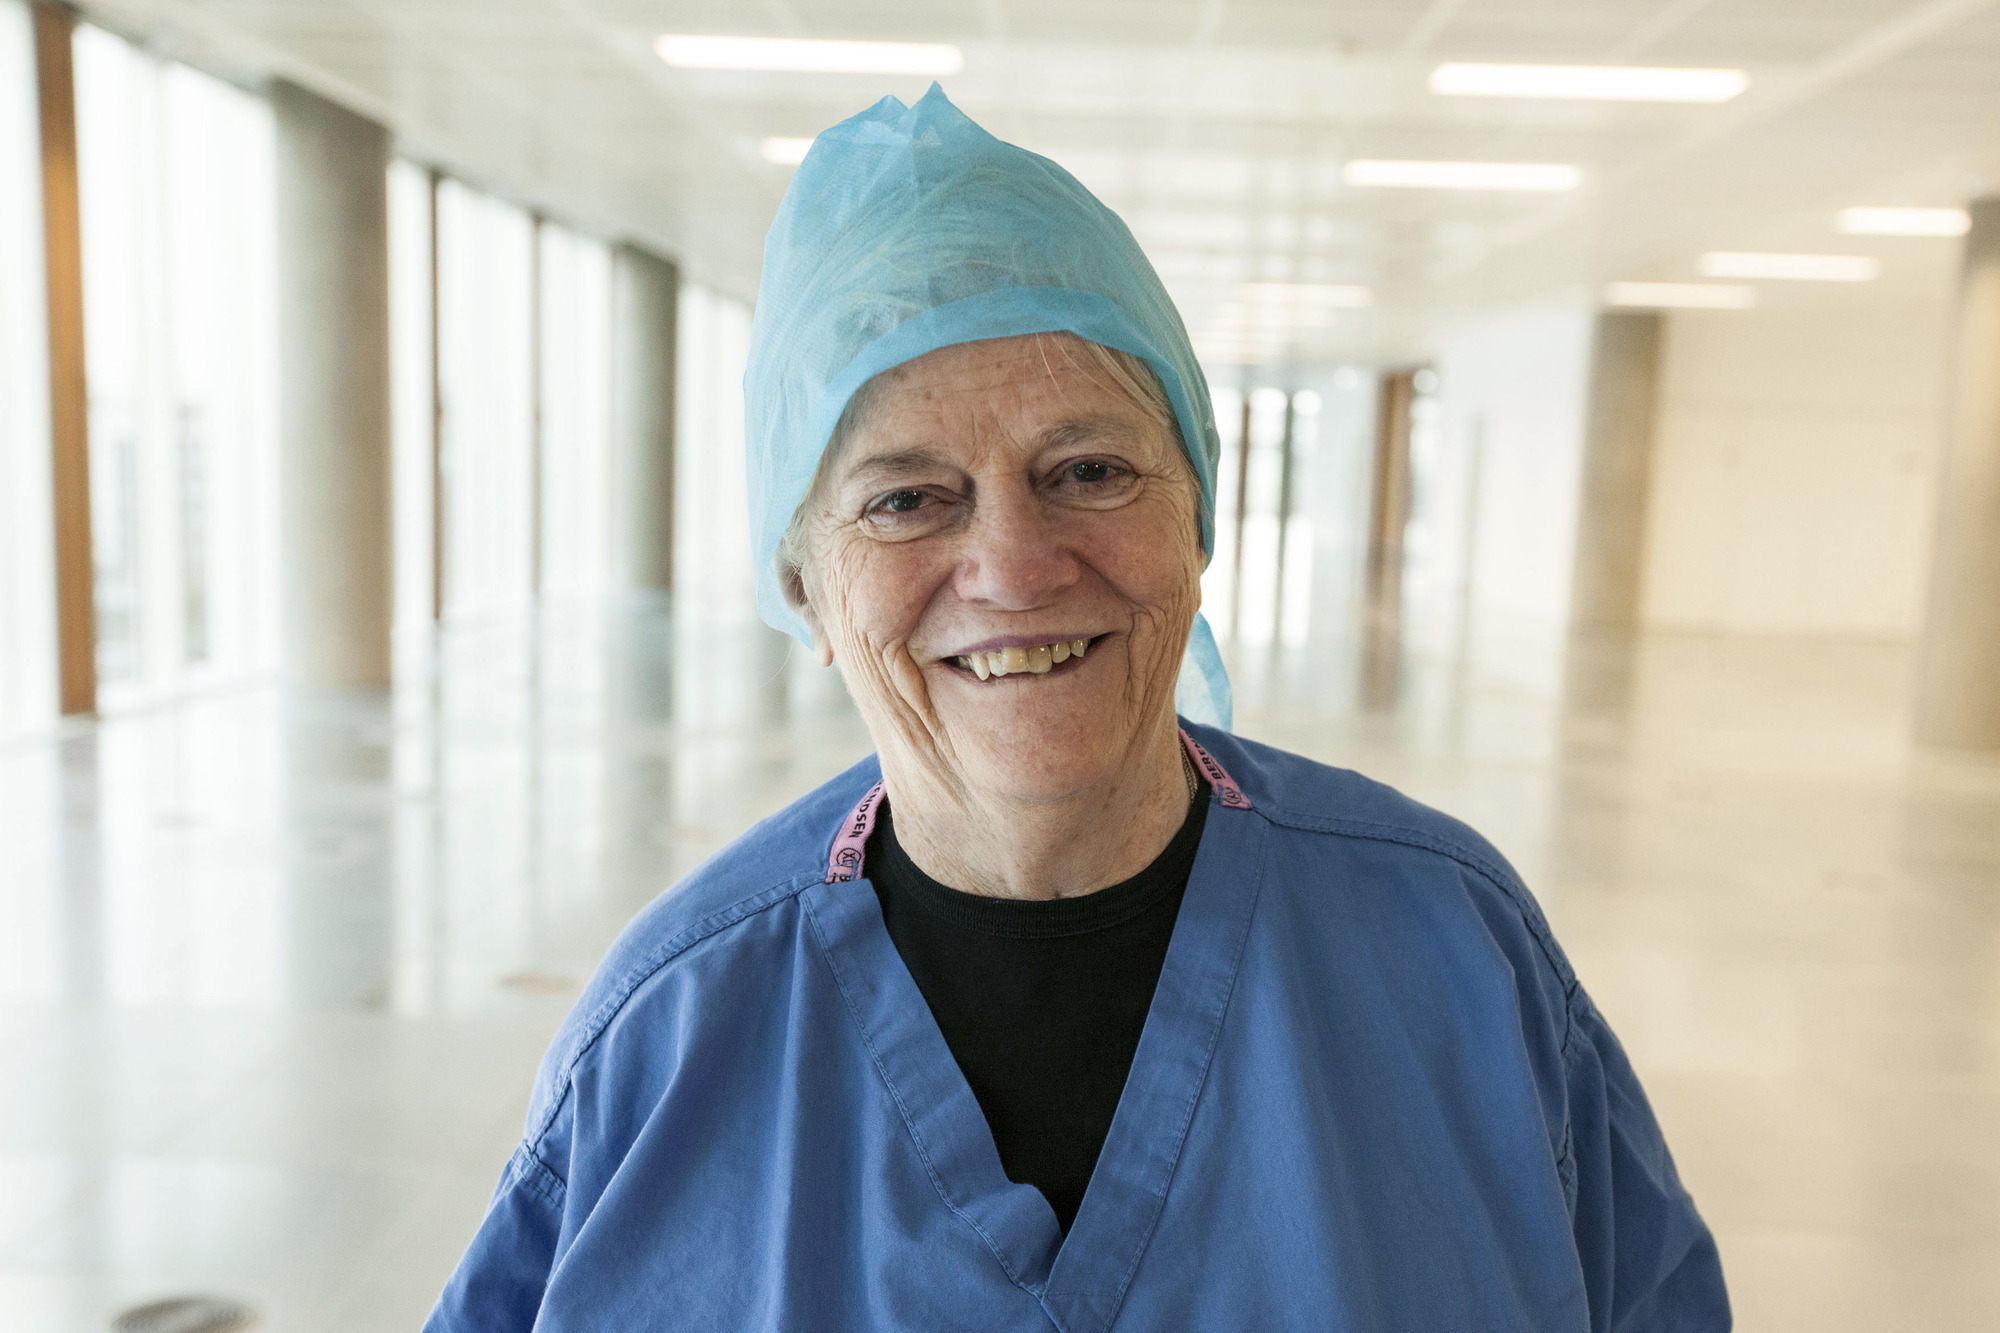 An old NHS female doctor smiles in a hospital hallway